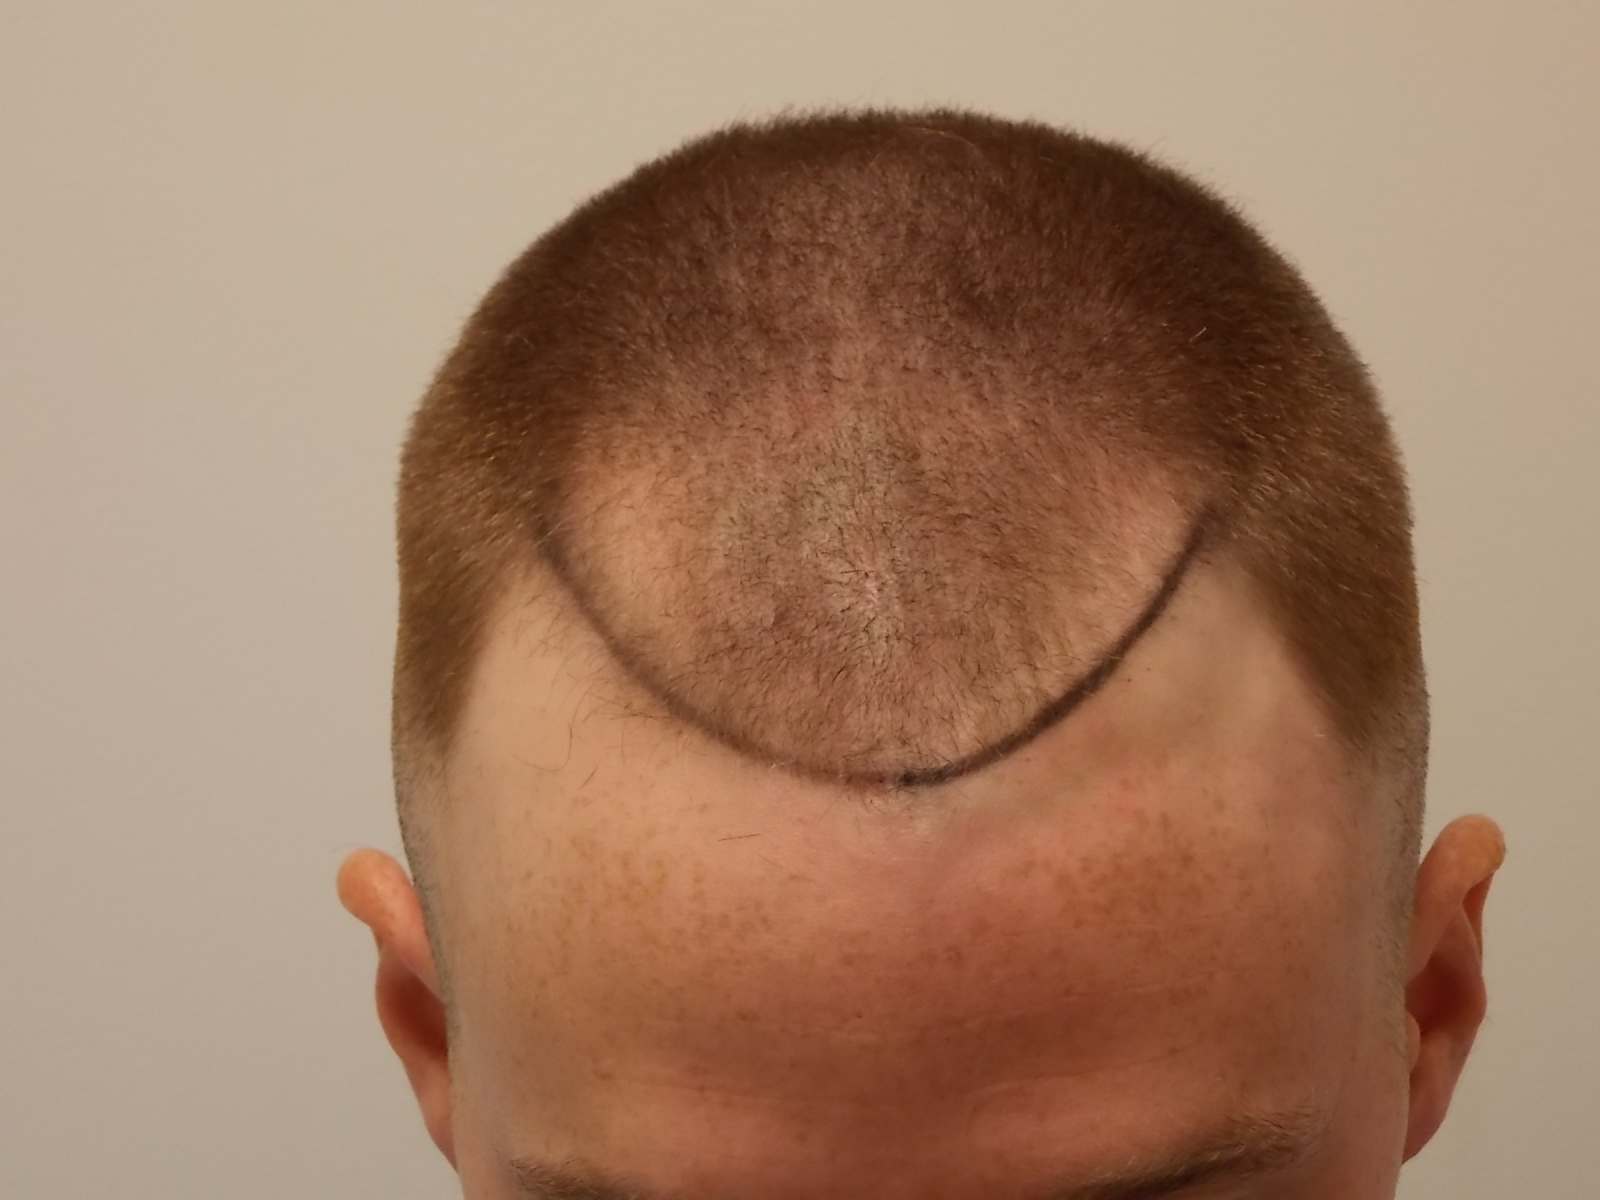 Head shaved before surgery- hairline drawn